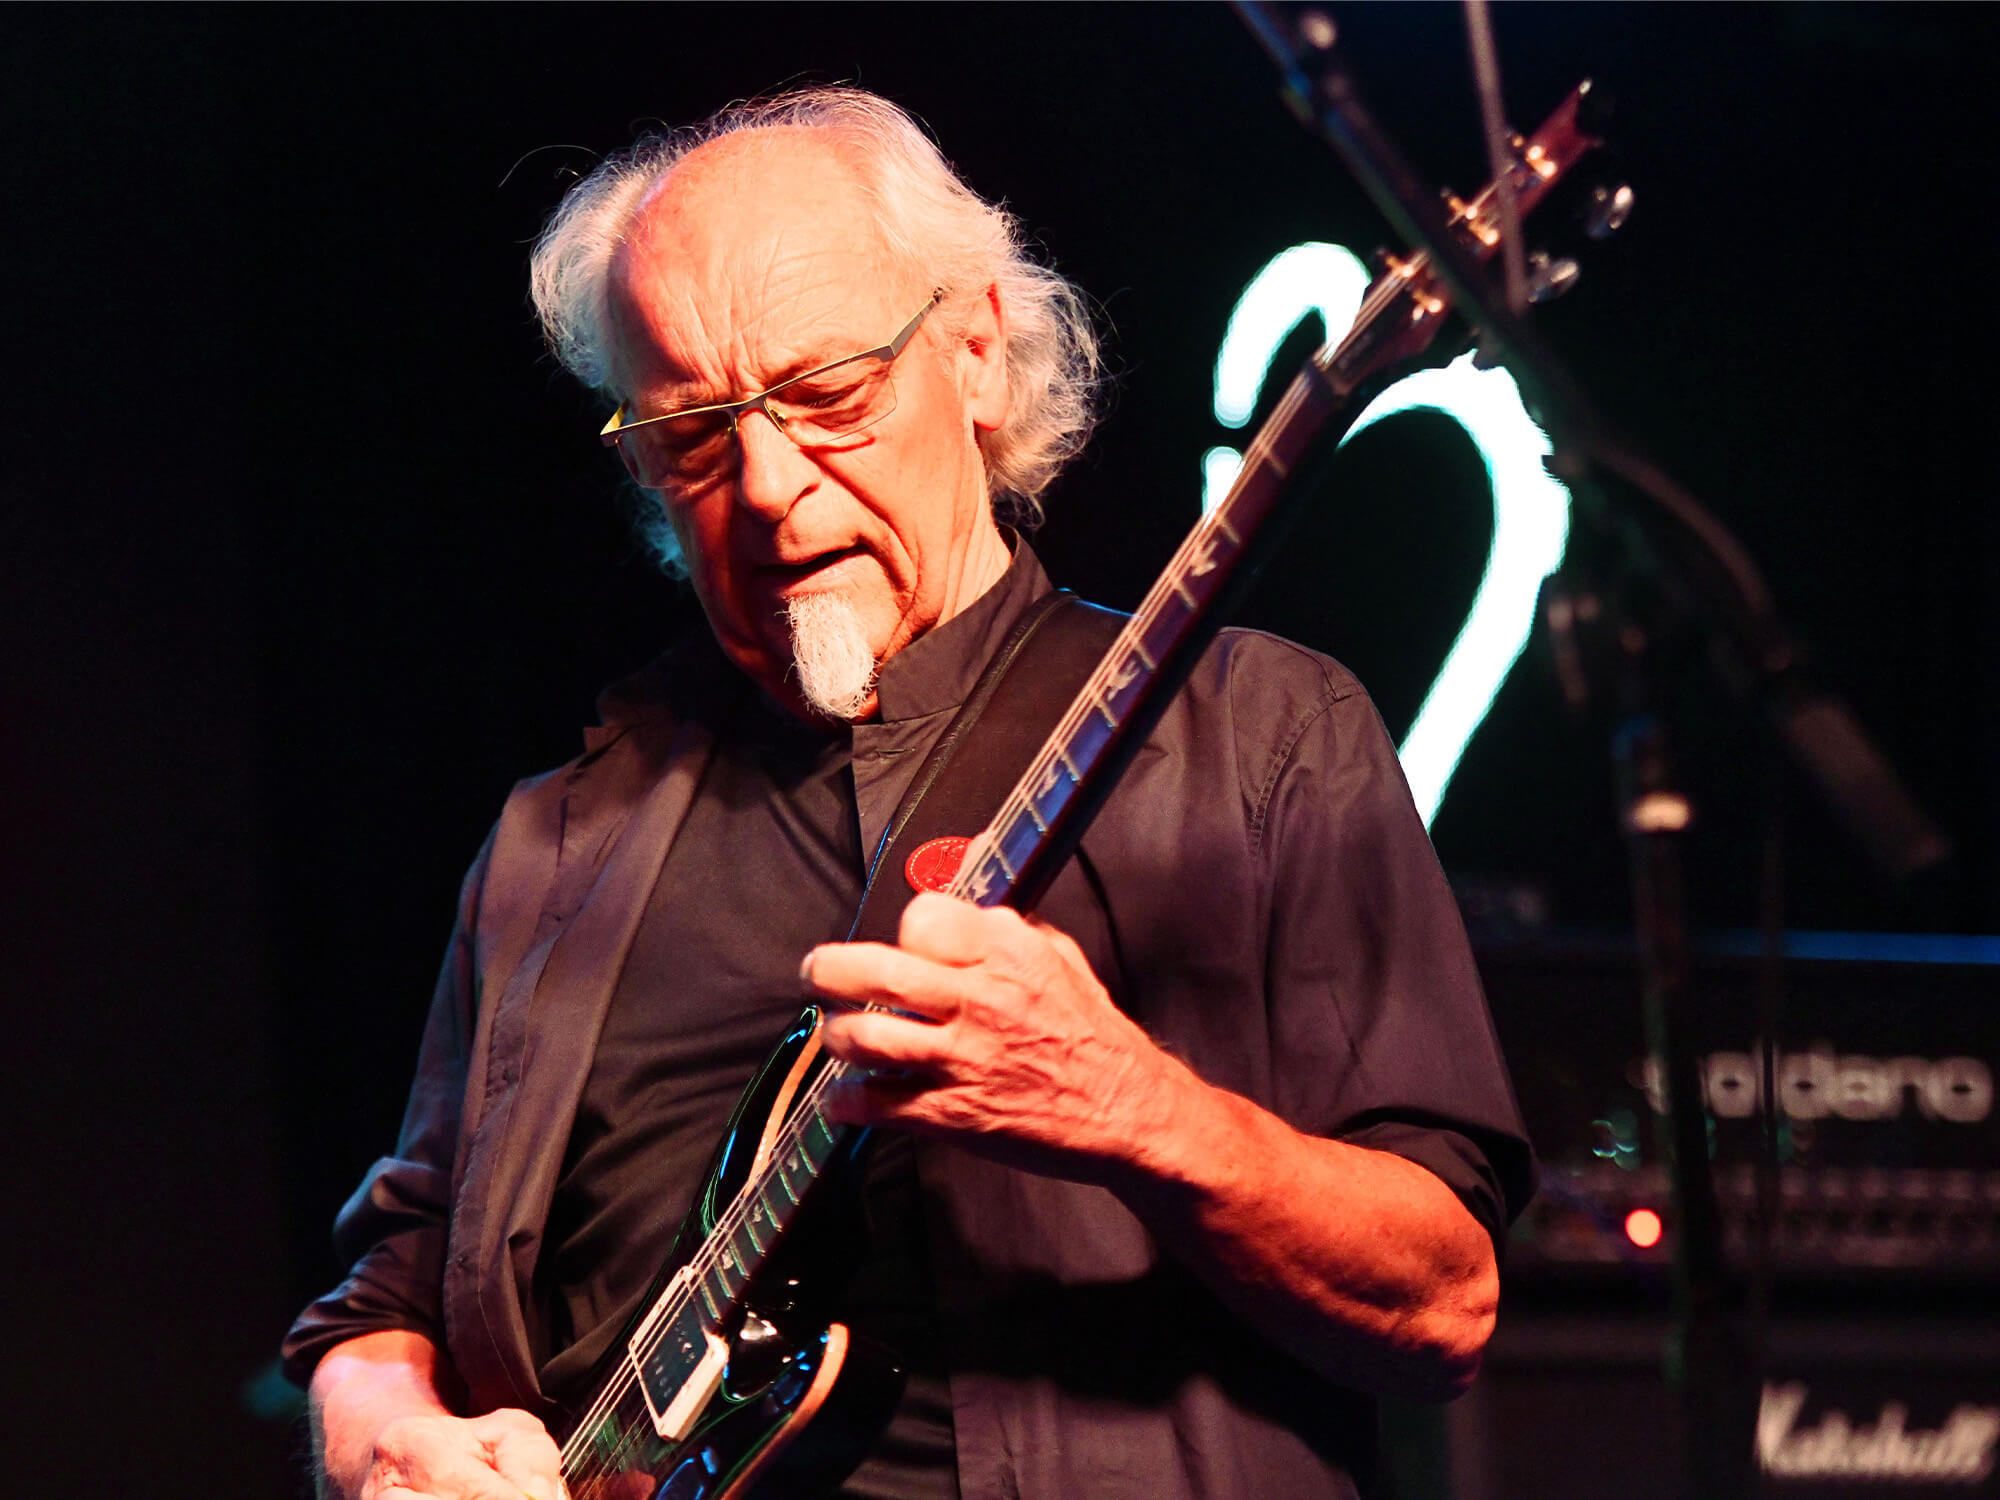 Martin Barre playing guitar on stage.